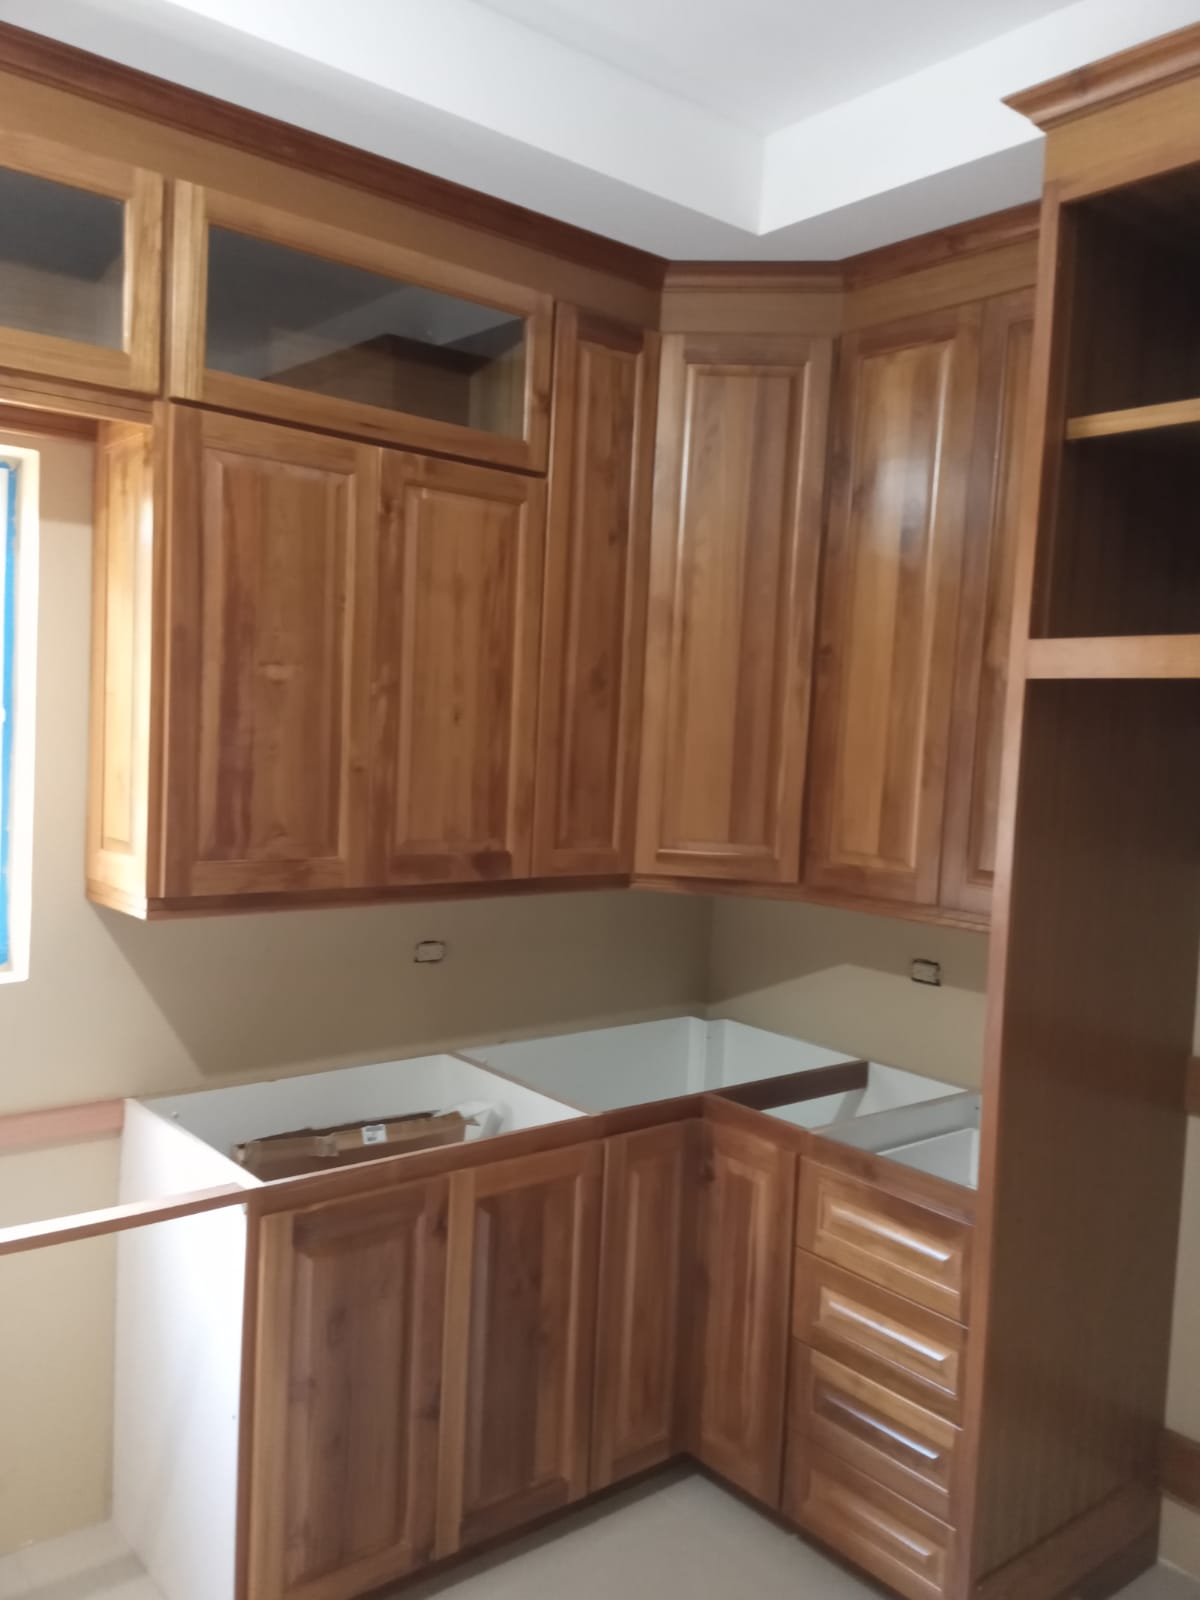 Kitchen & Countertops - Wood Plus Limited